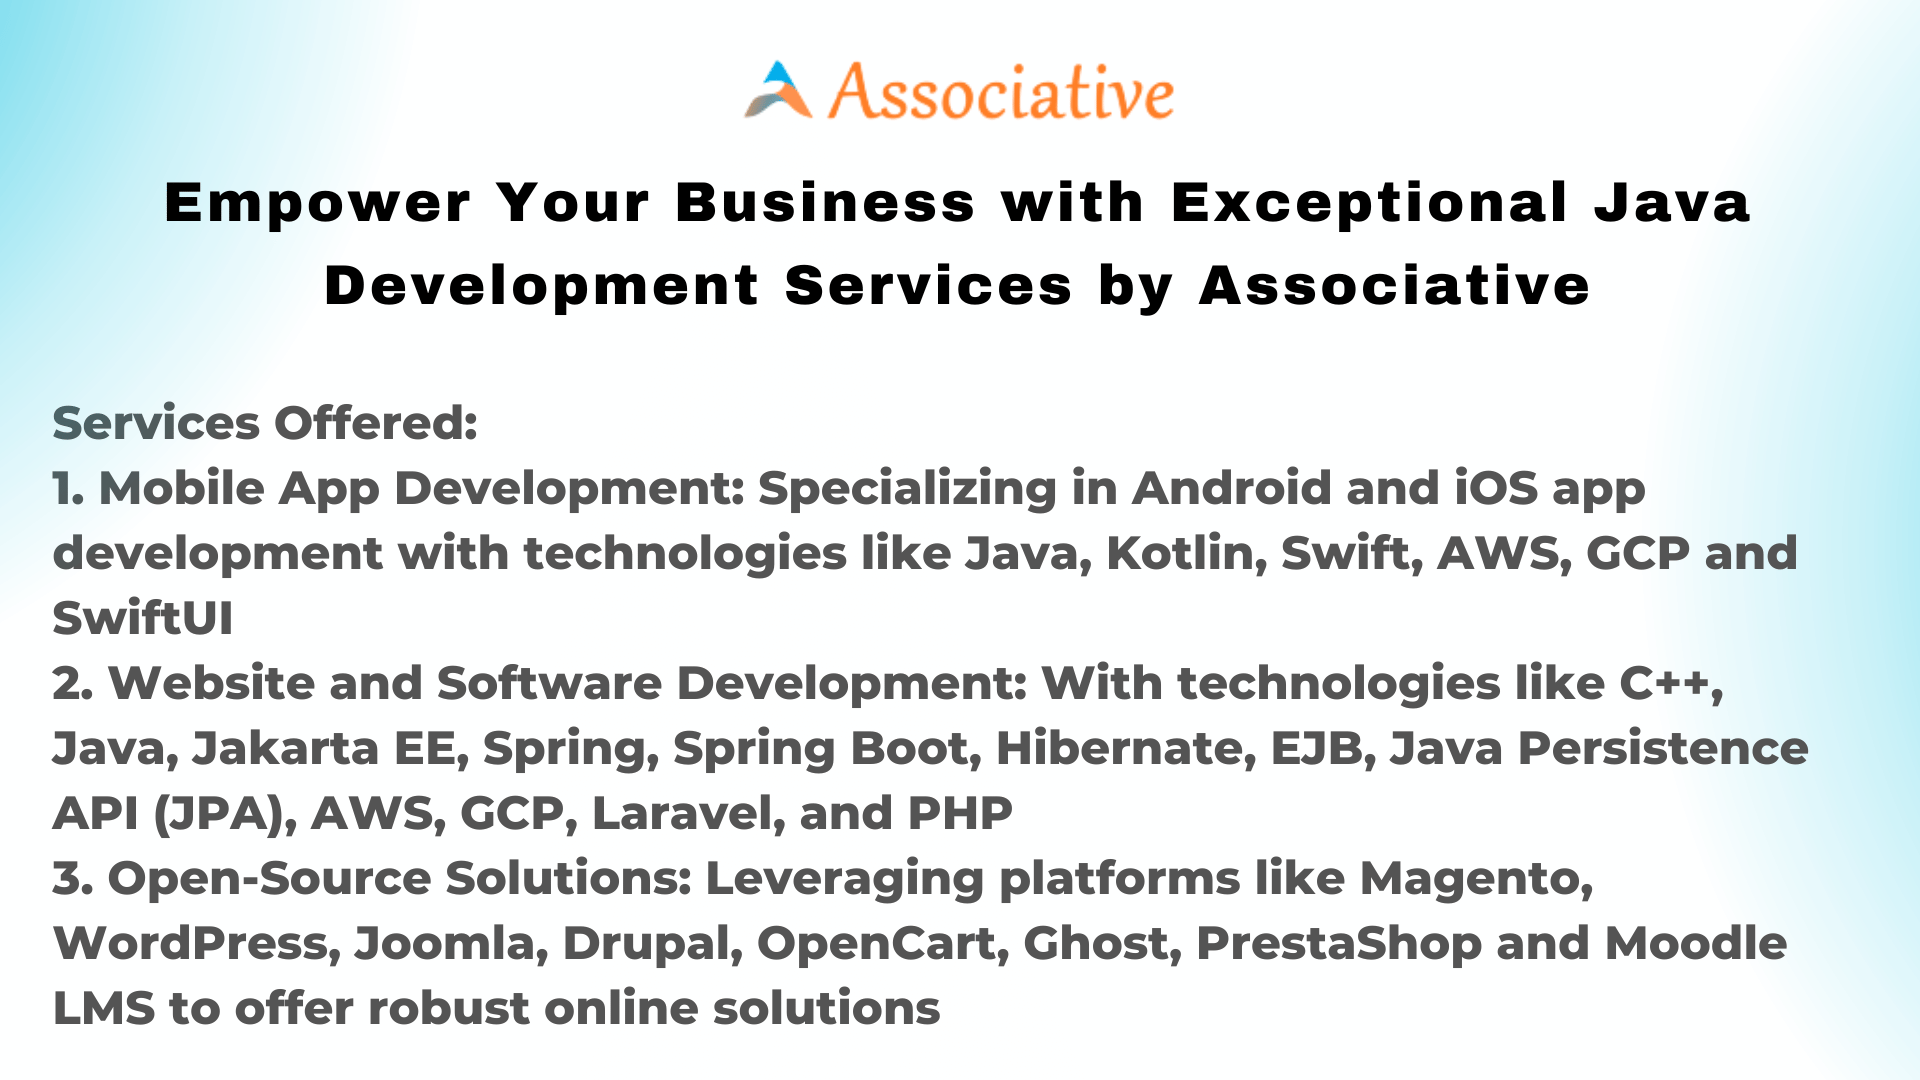 Empower Your Business with Exceptional Java Development Services by Associative